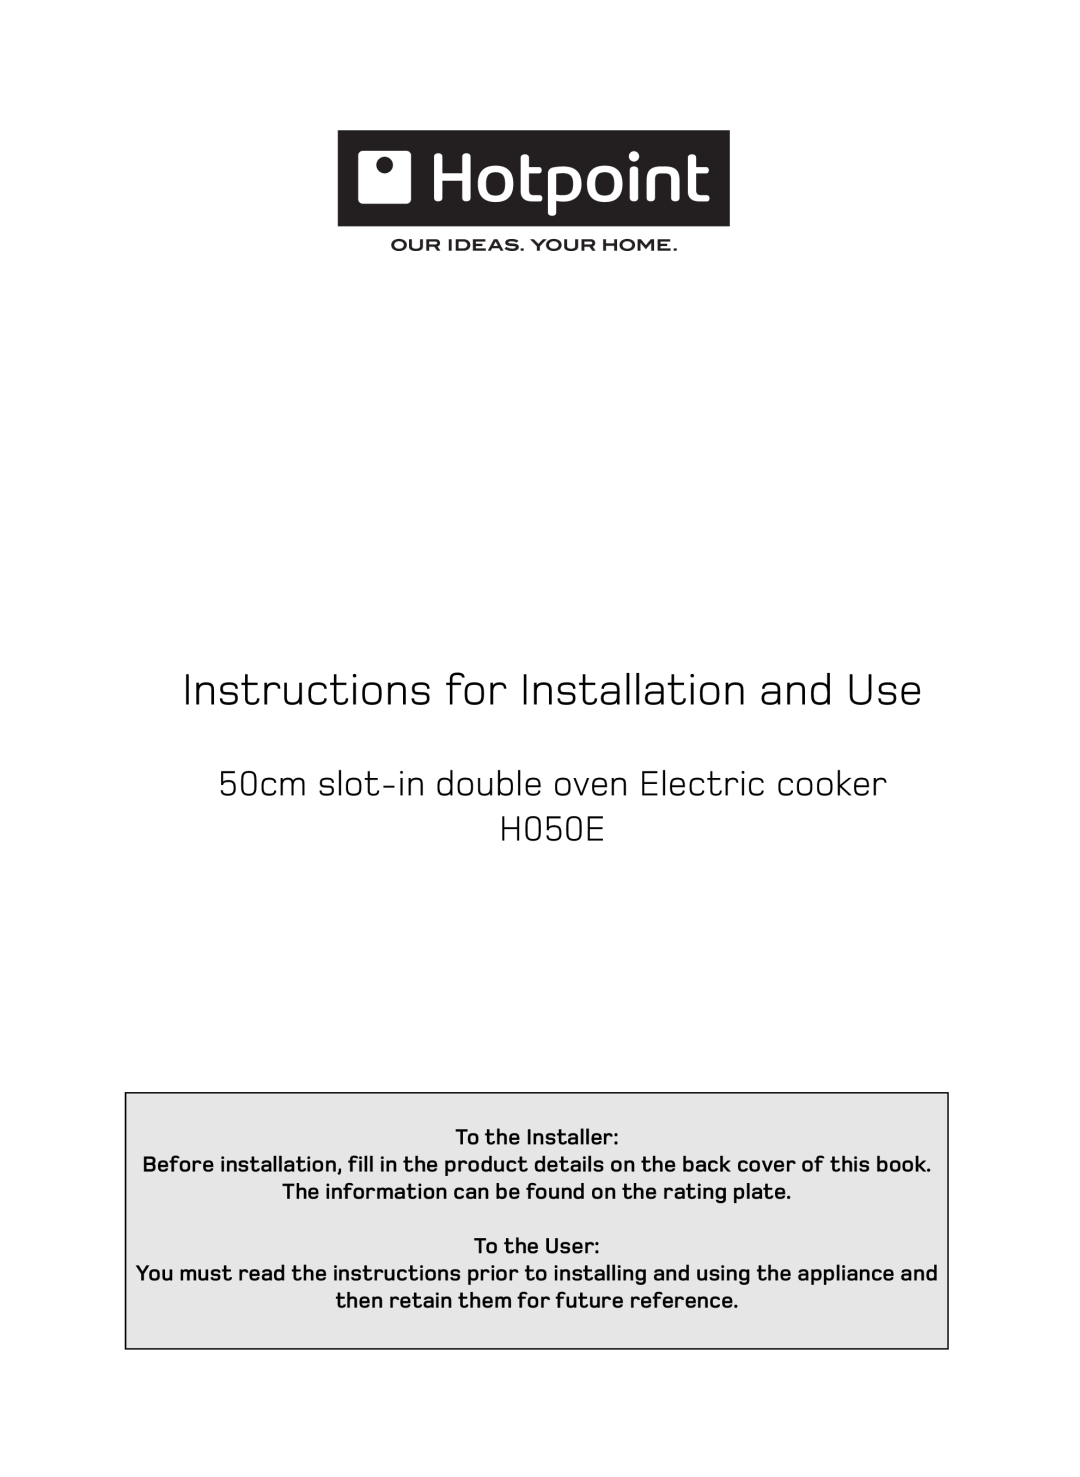 Hotpoint manual Instructions for Installation and Use, 50cm slot-indouble oven Electric cooker H050E, To the Installer 